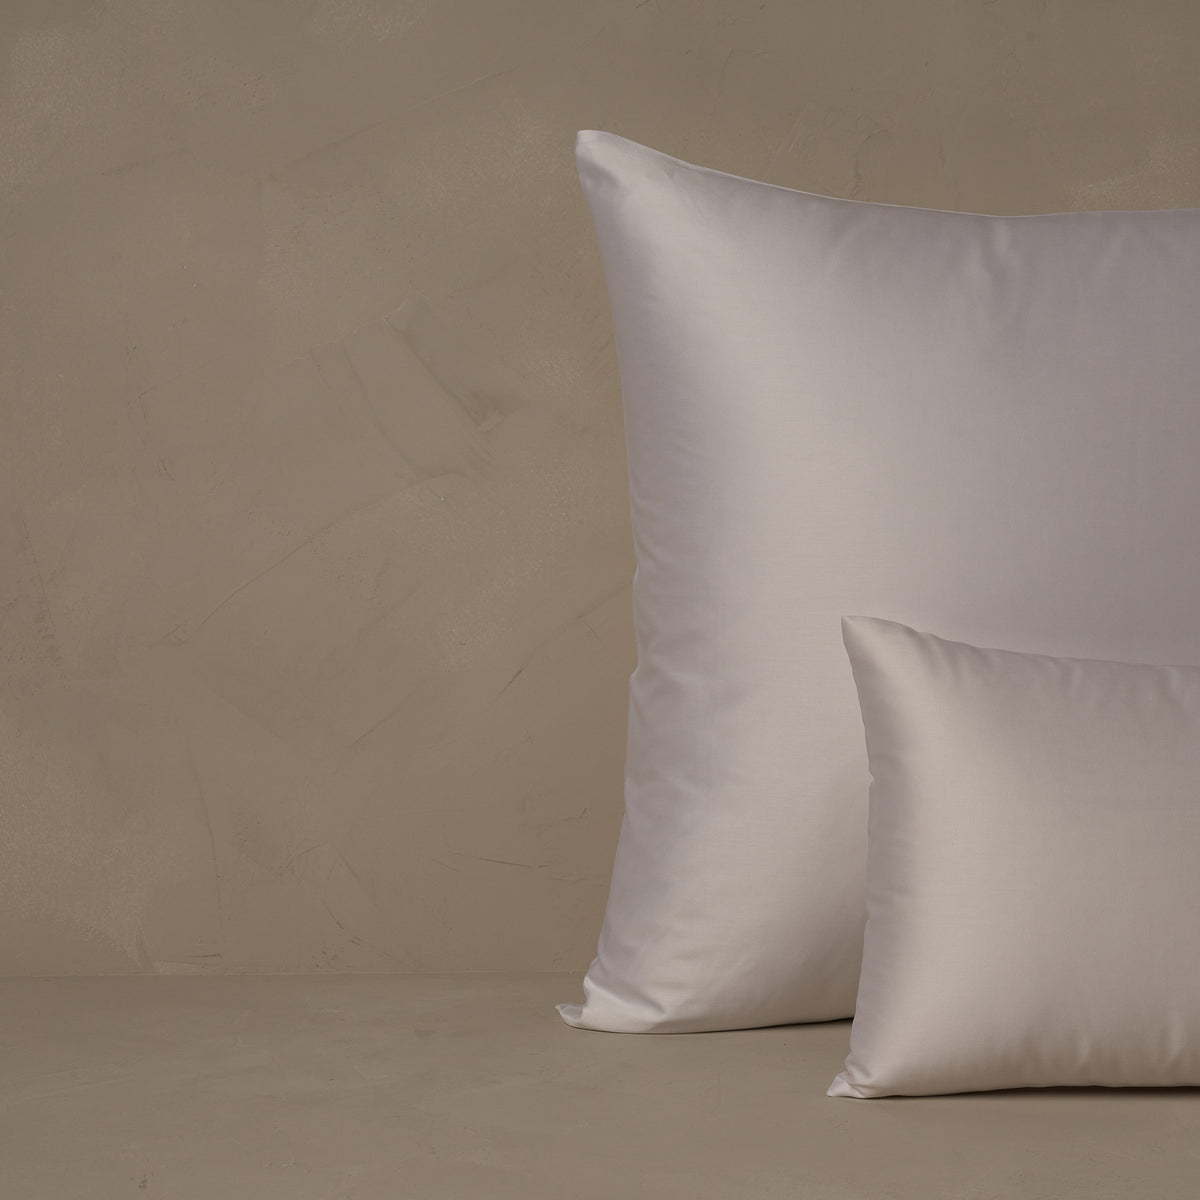 An image of a small boudoir or travel size pillow stacked in front of a large euro size pillow. The pillow cases are made of LETTO's warm and buttery Classic Cotton Sateen in color white. data-image-id=